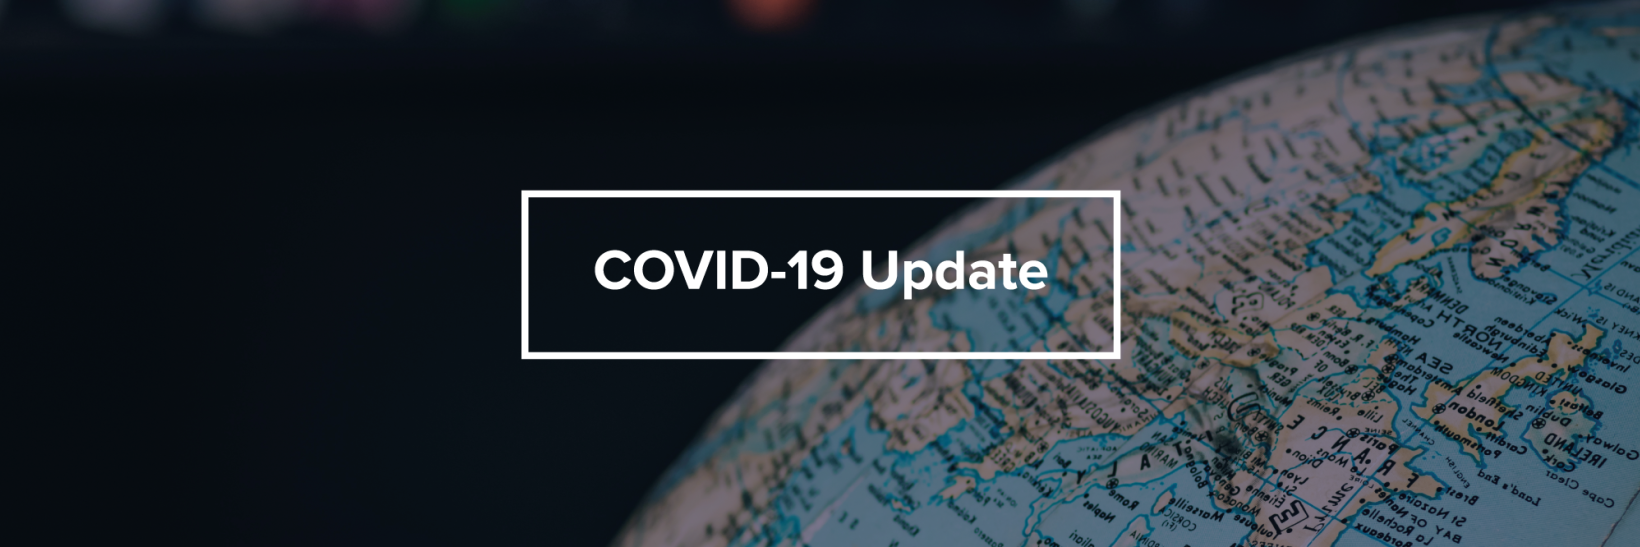 globe with text that reads, "COVID-19 update"